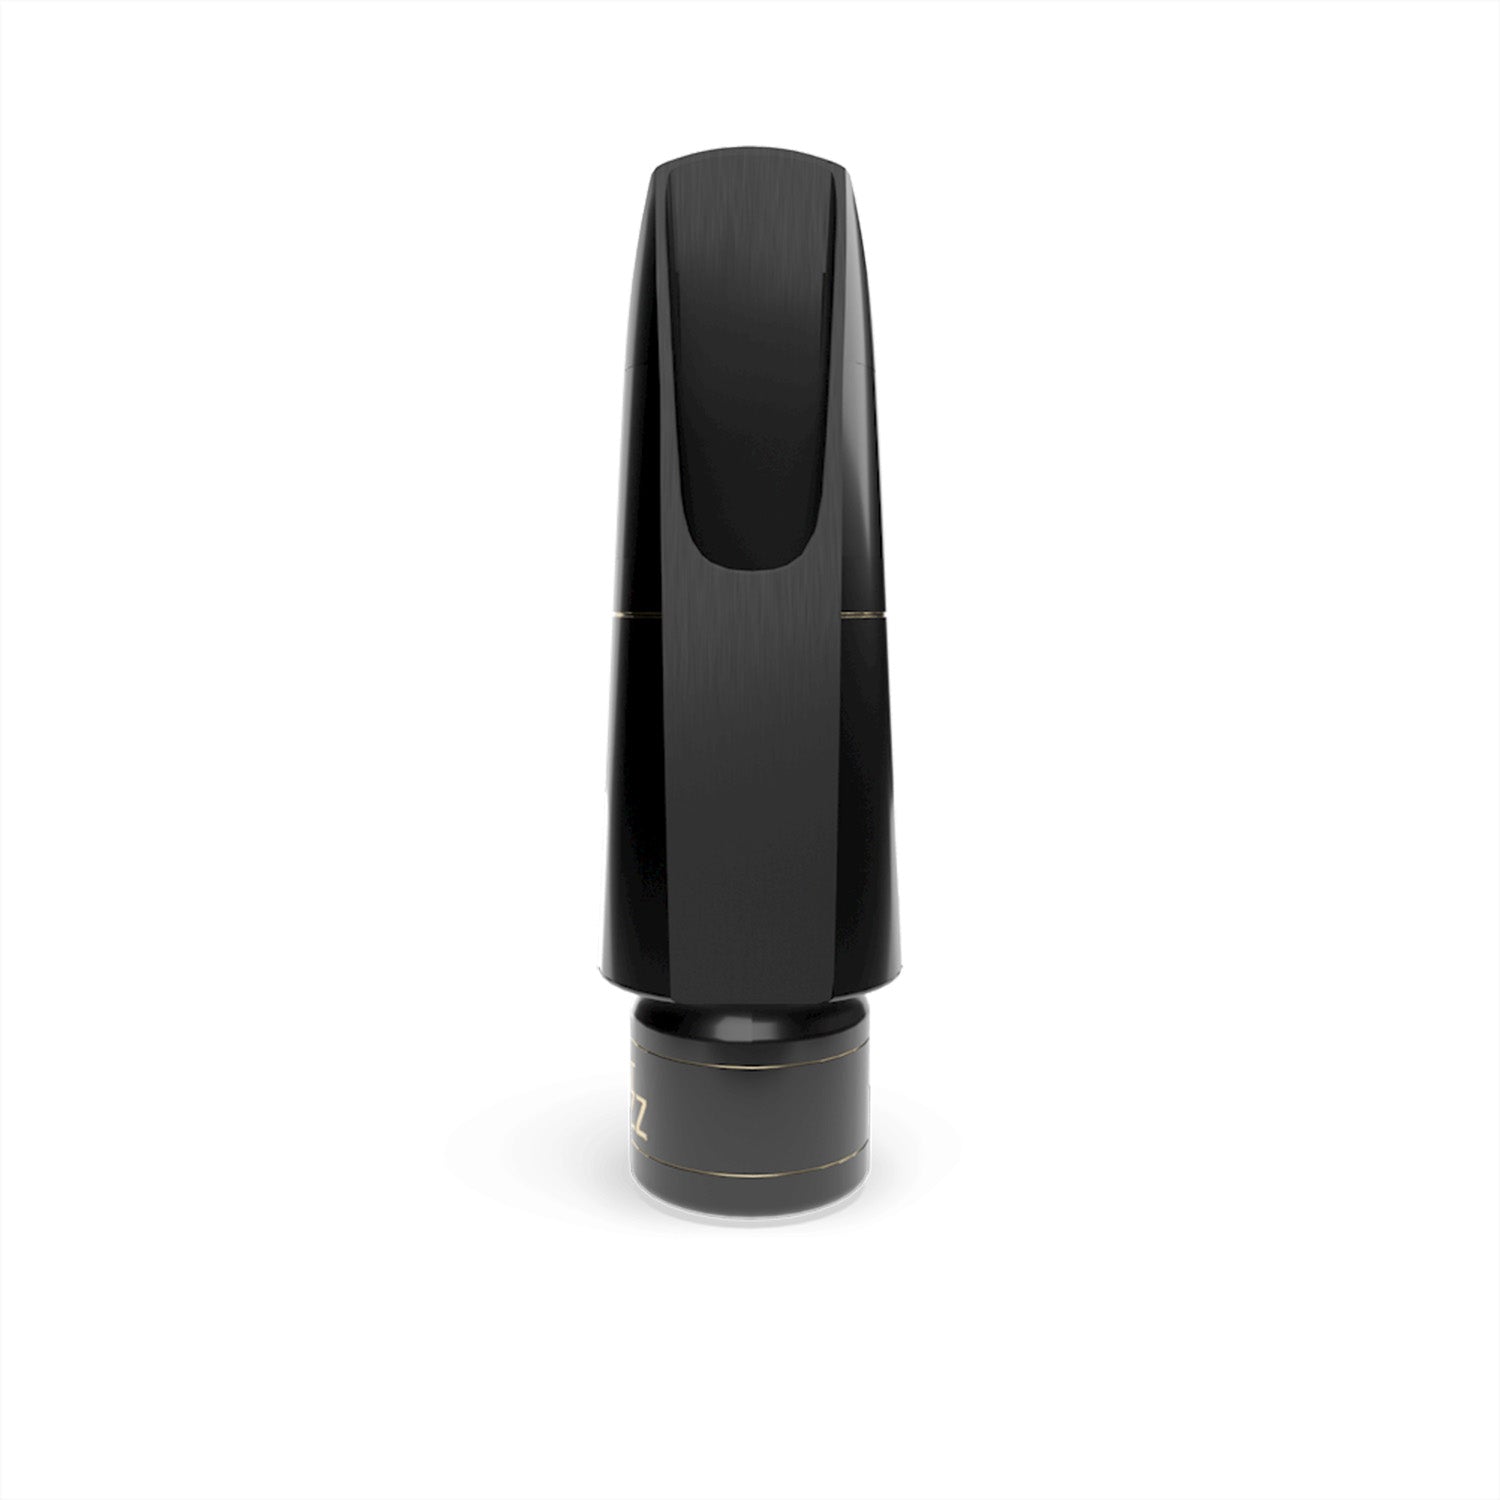 Rear view photo of D'addario Select Jazz Tenor Sax mouthpiece on a white background